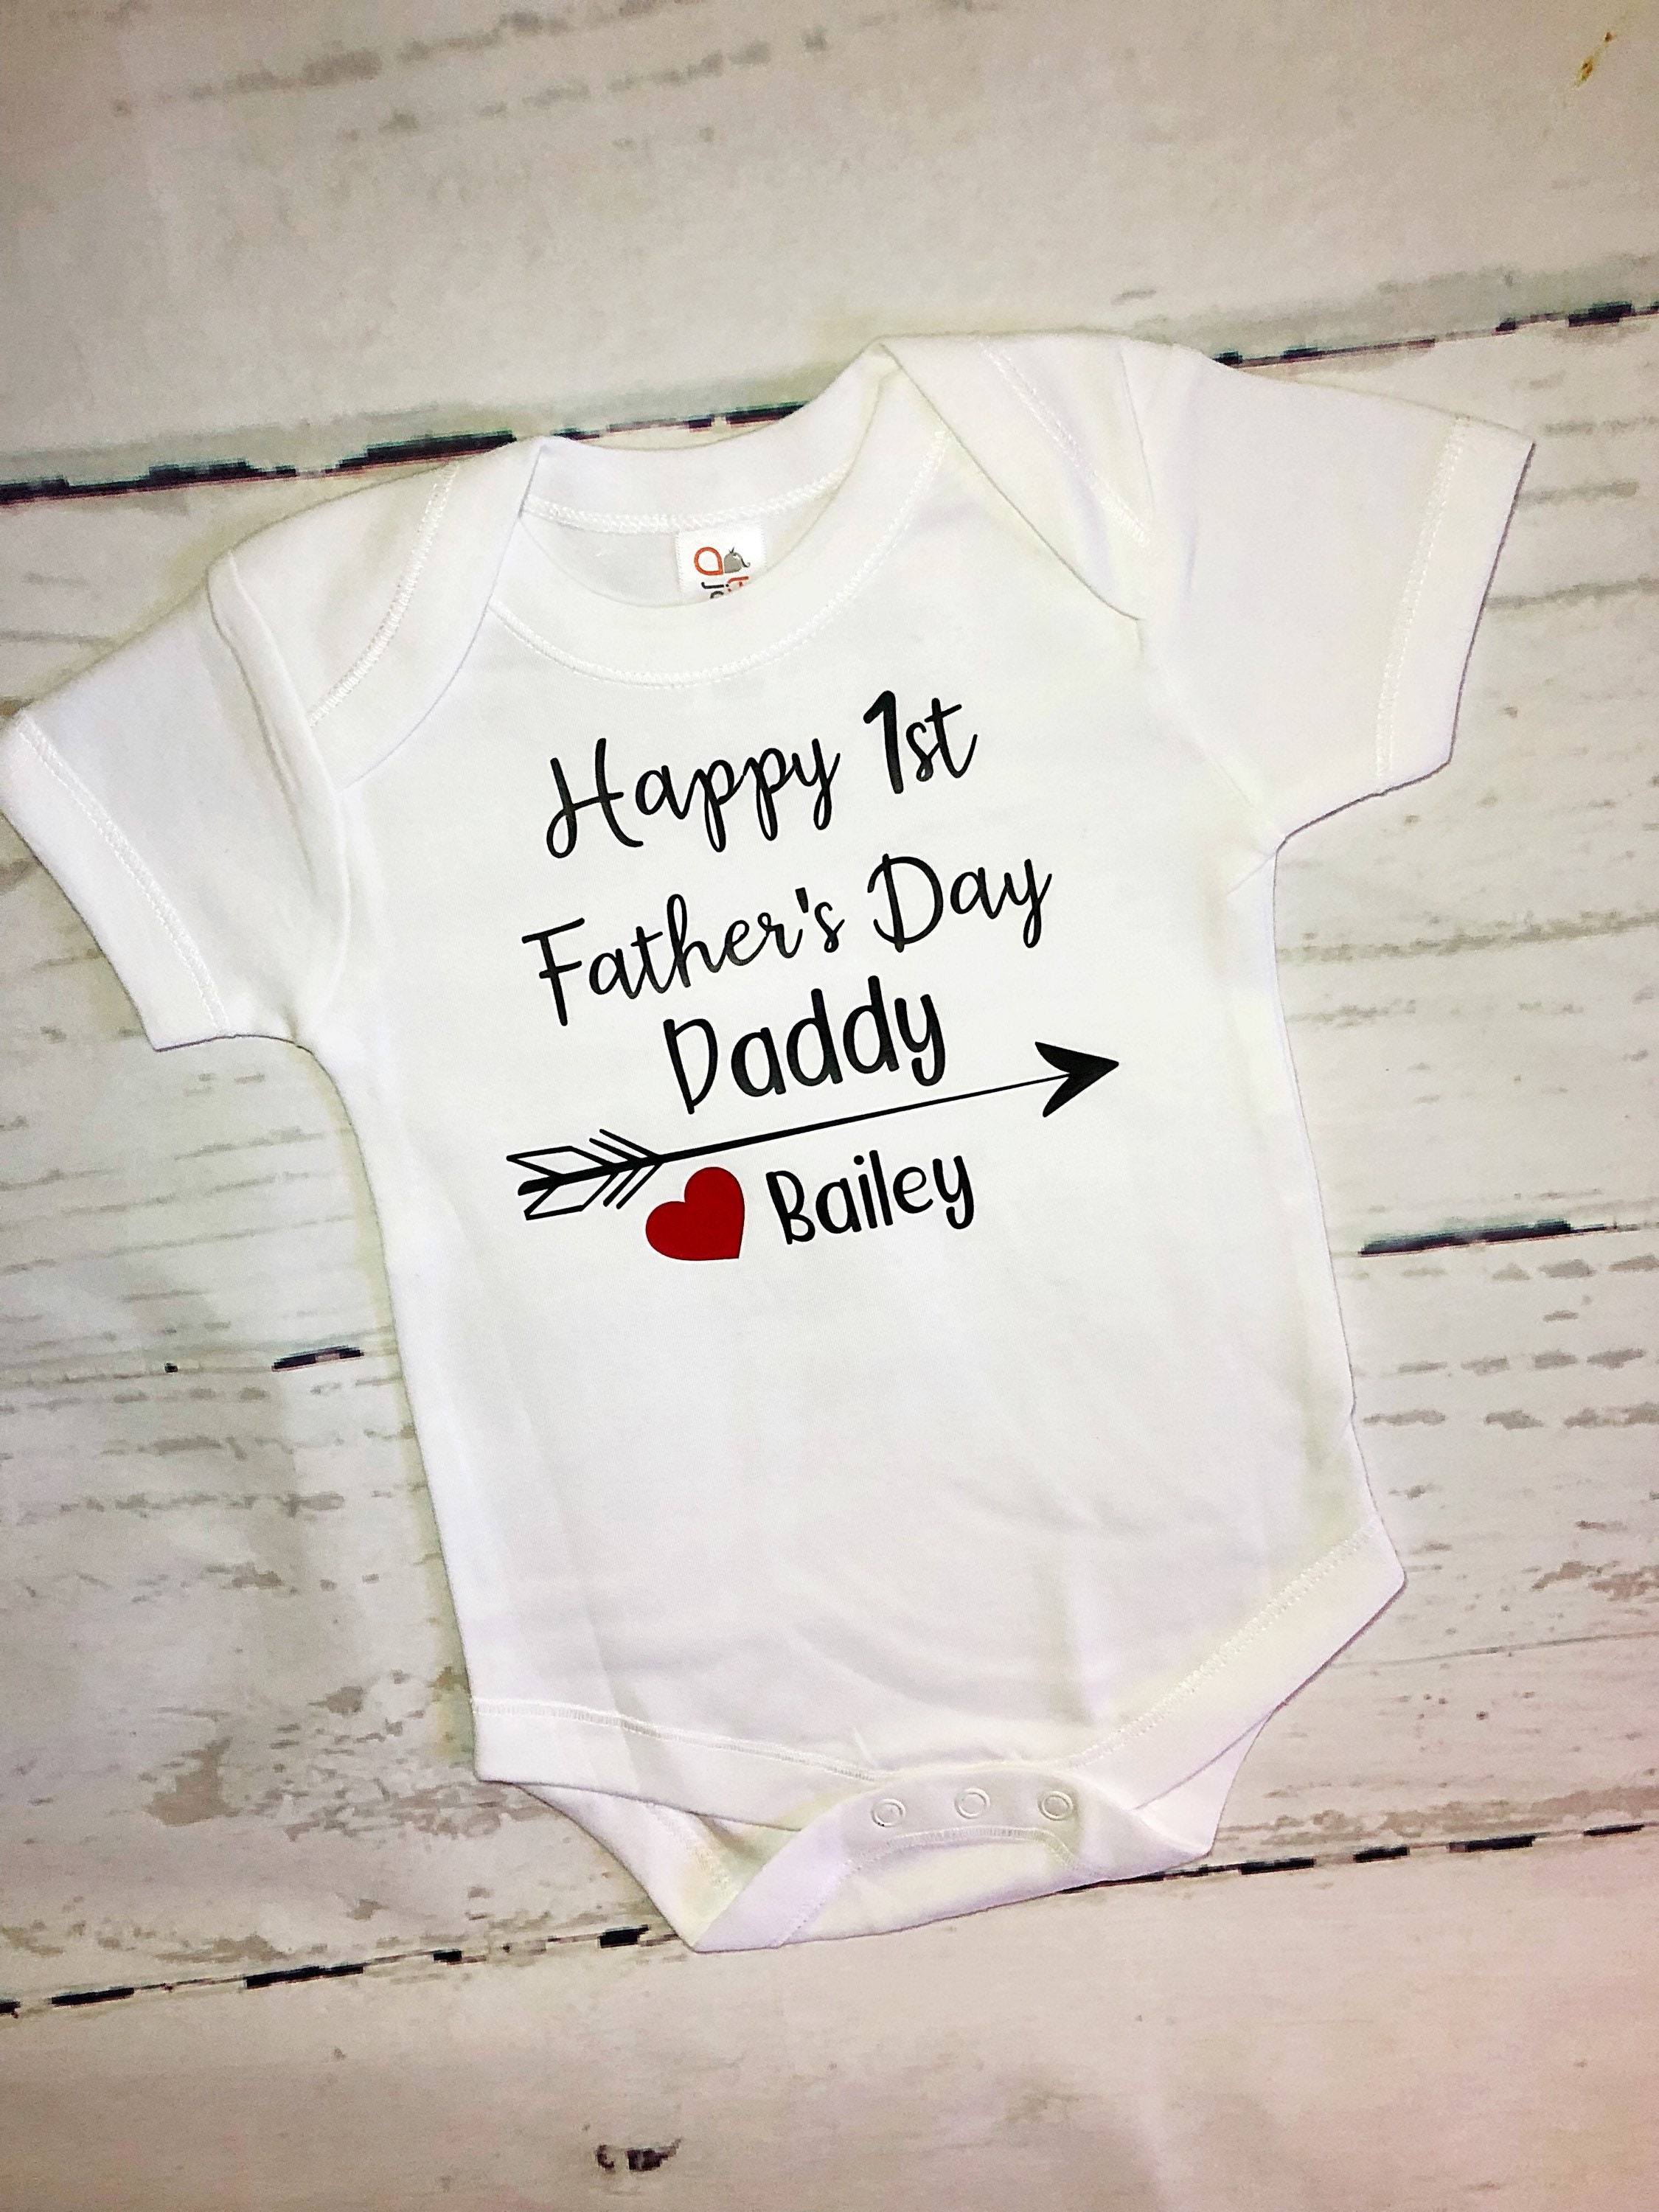 Add Your Name Personalized Custom First Fathers Day Baby Outfit